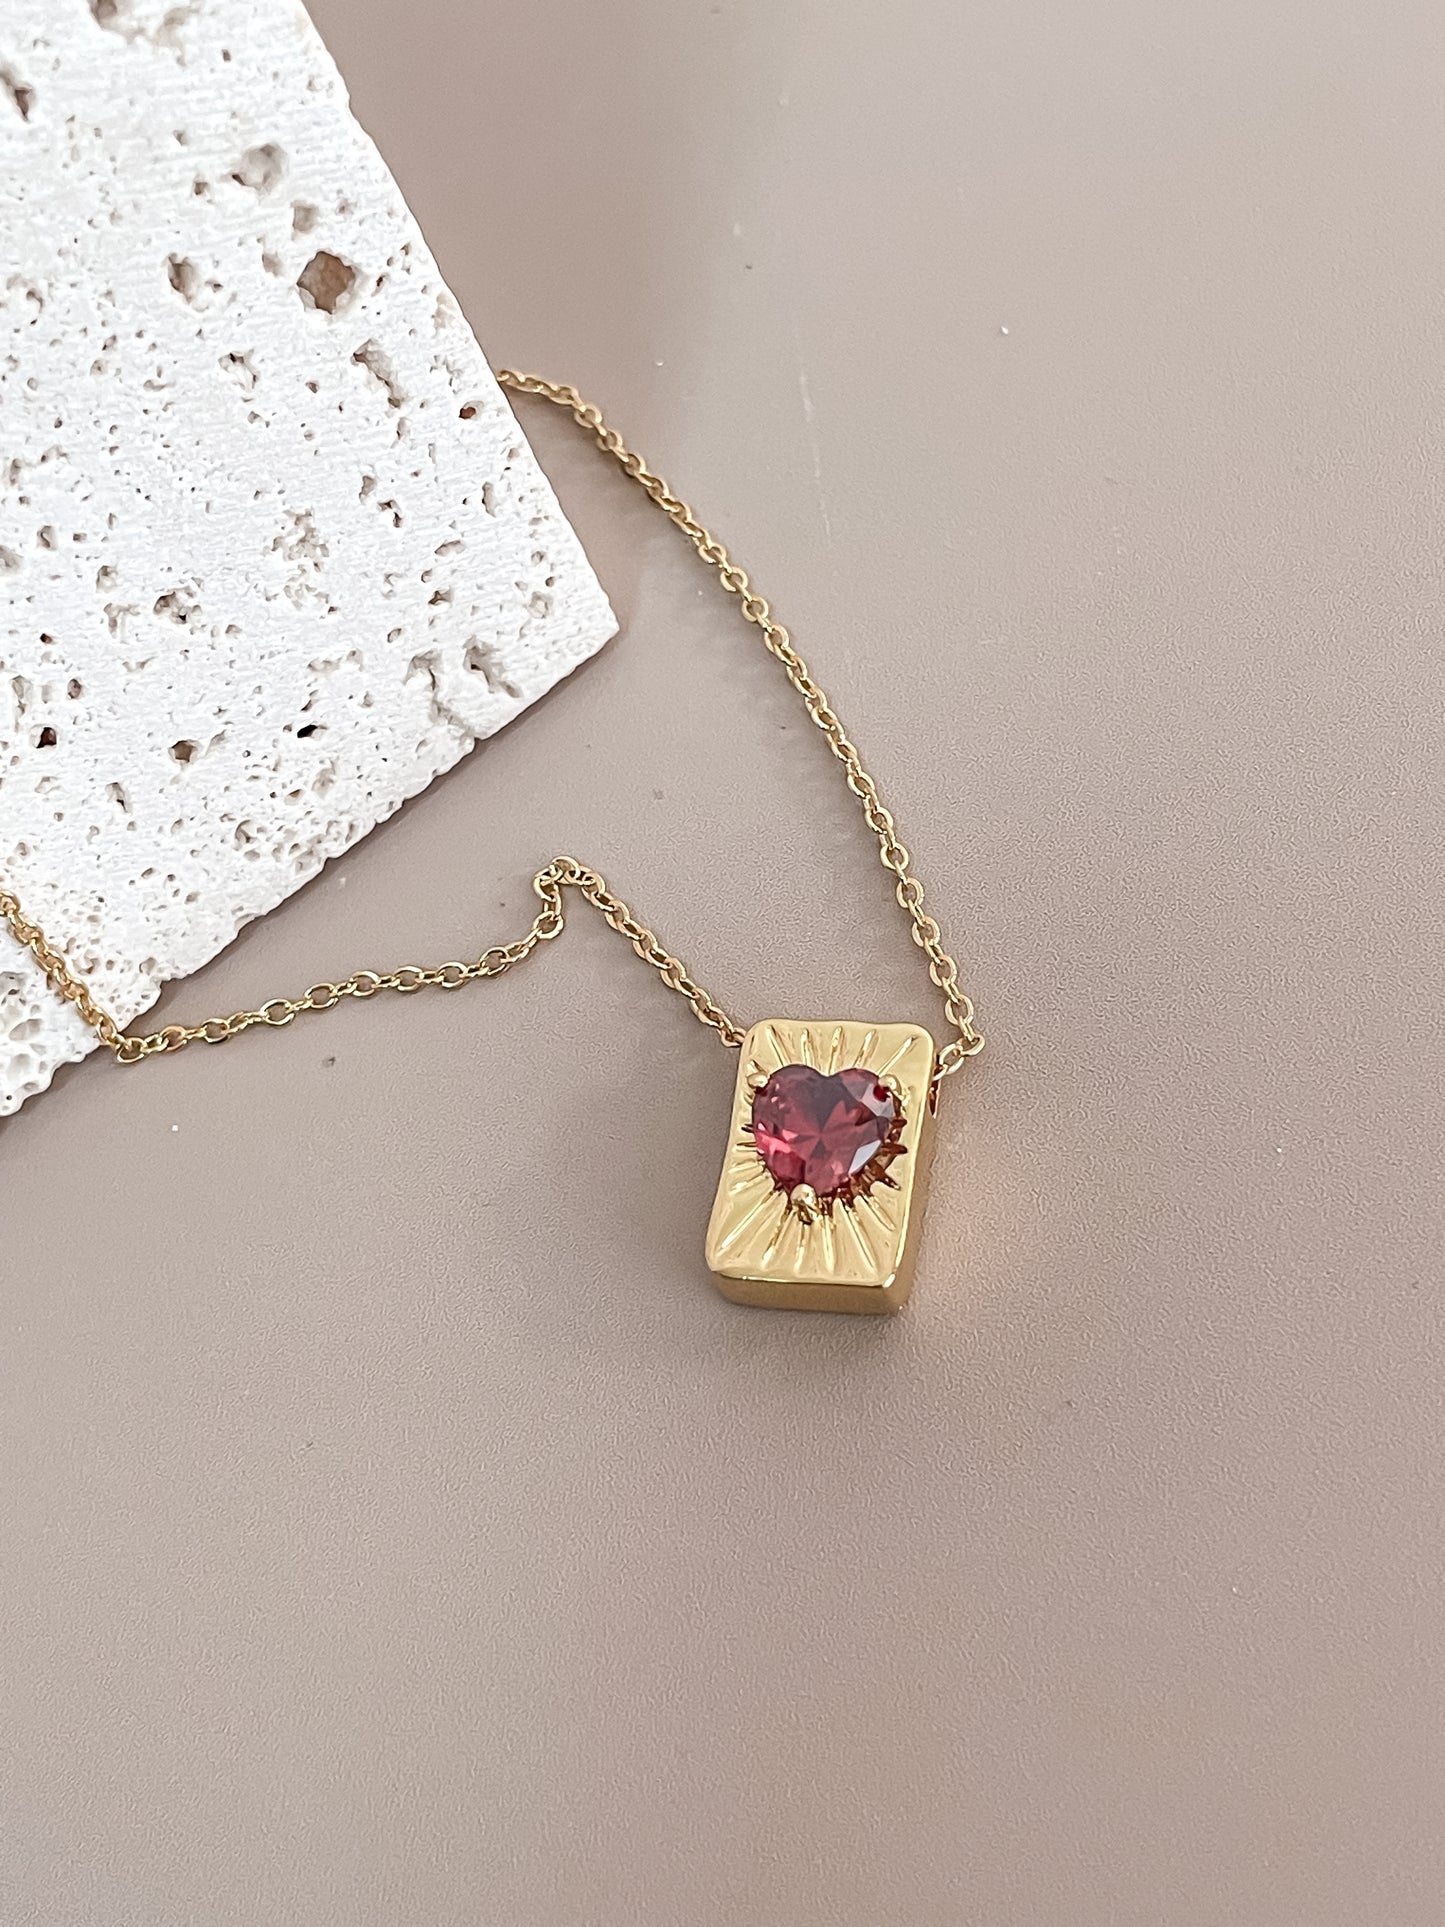 Ruby Heart Nugget Pendant Necklace